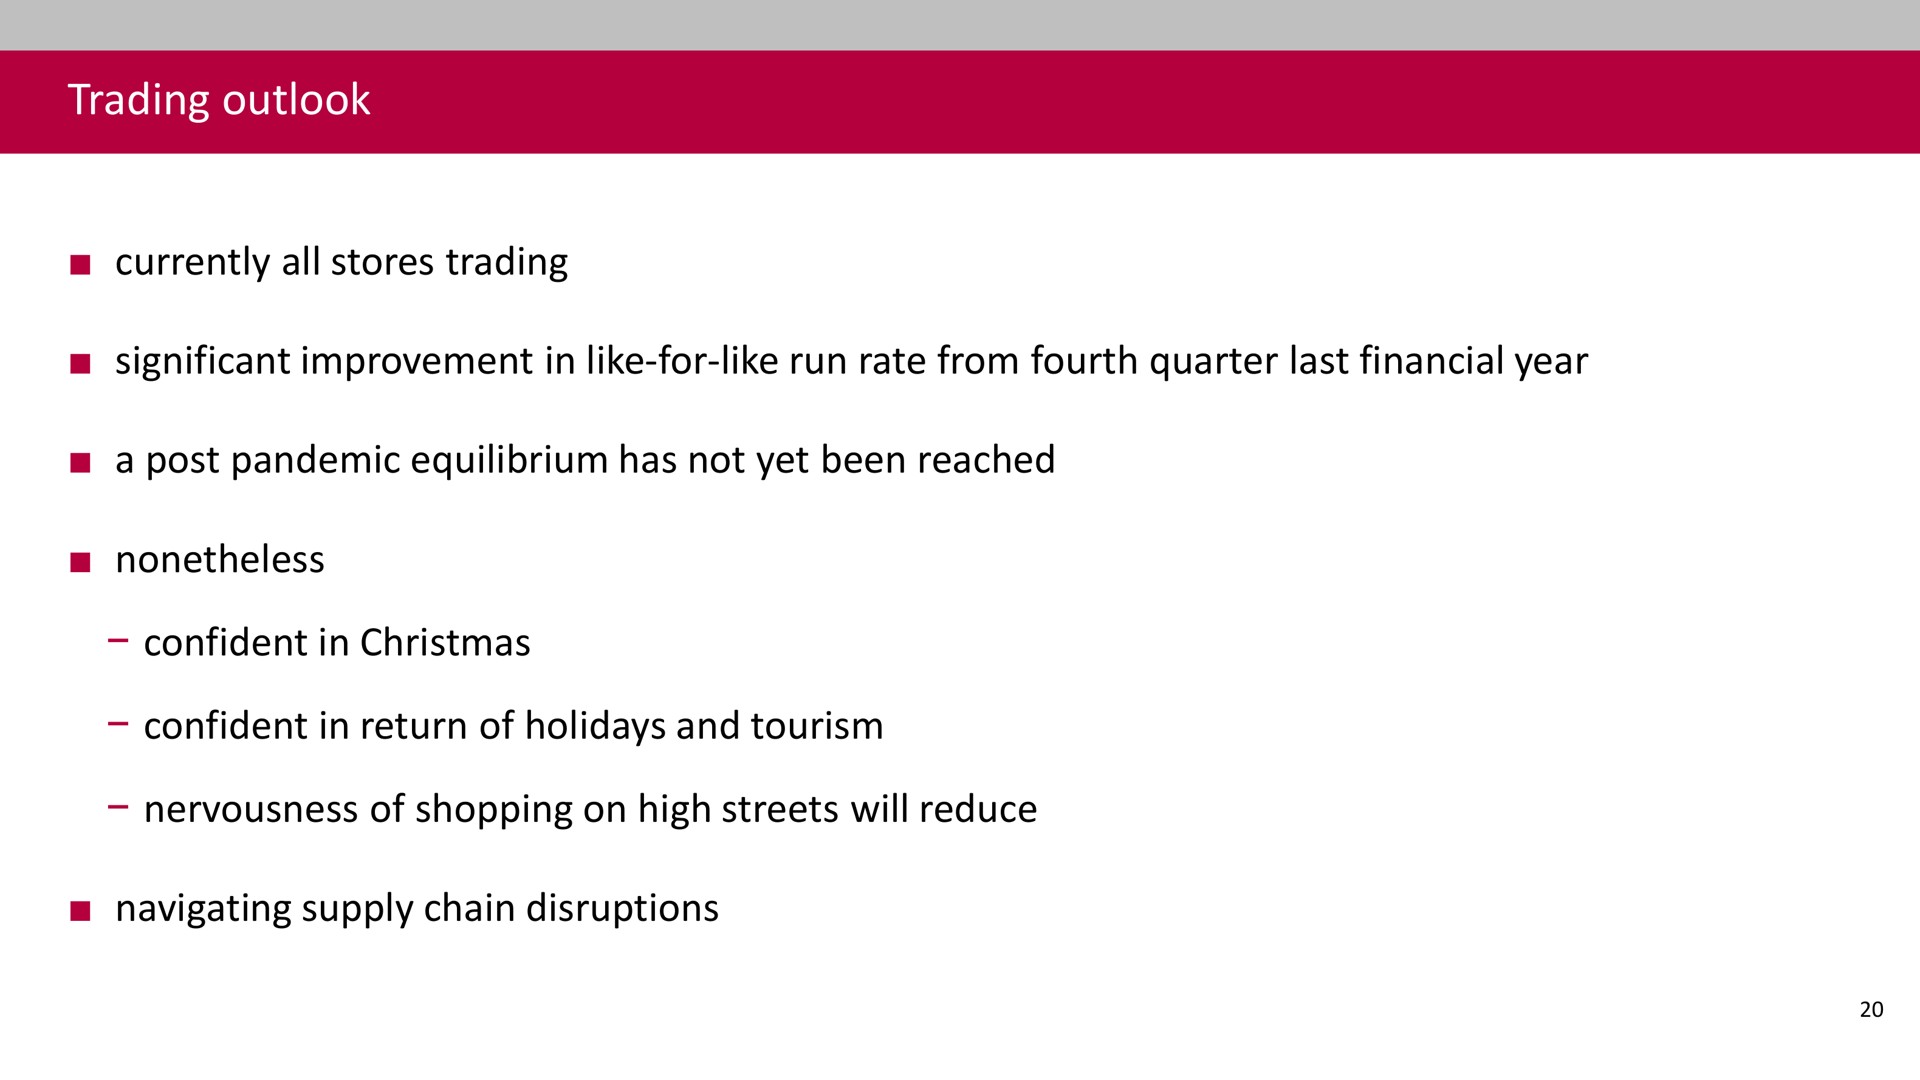 trading outlook | Associated British Foods